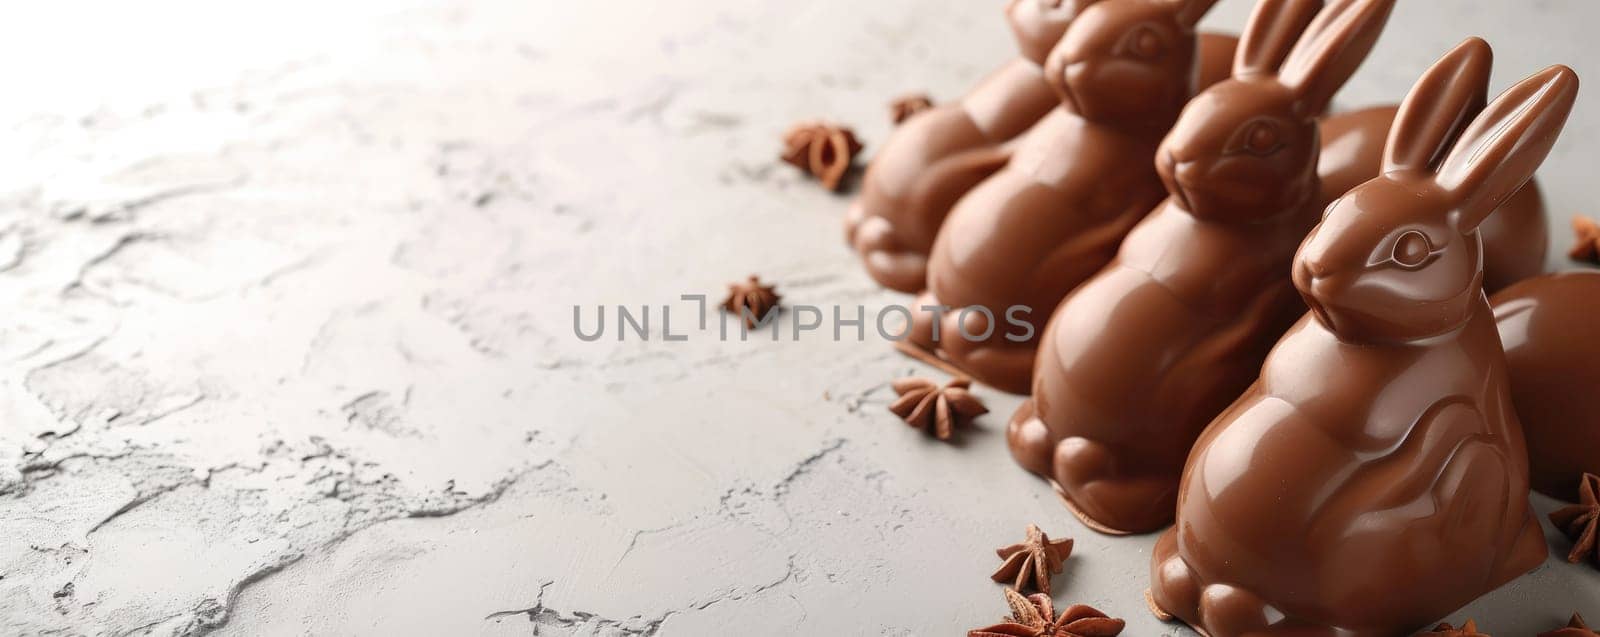 Set of Easter chocolate bunnies on light background by Yurich32